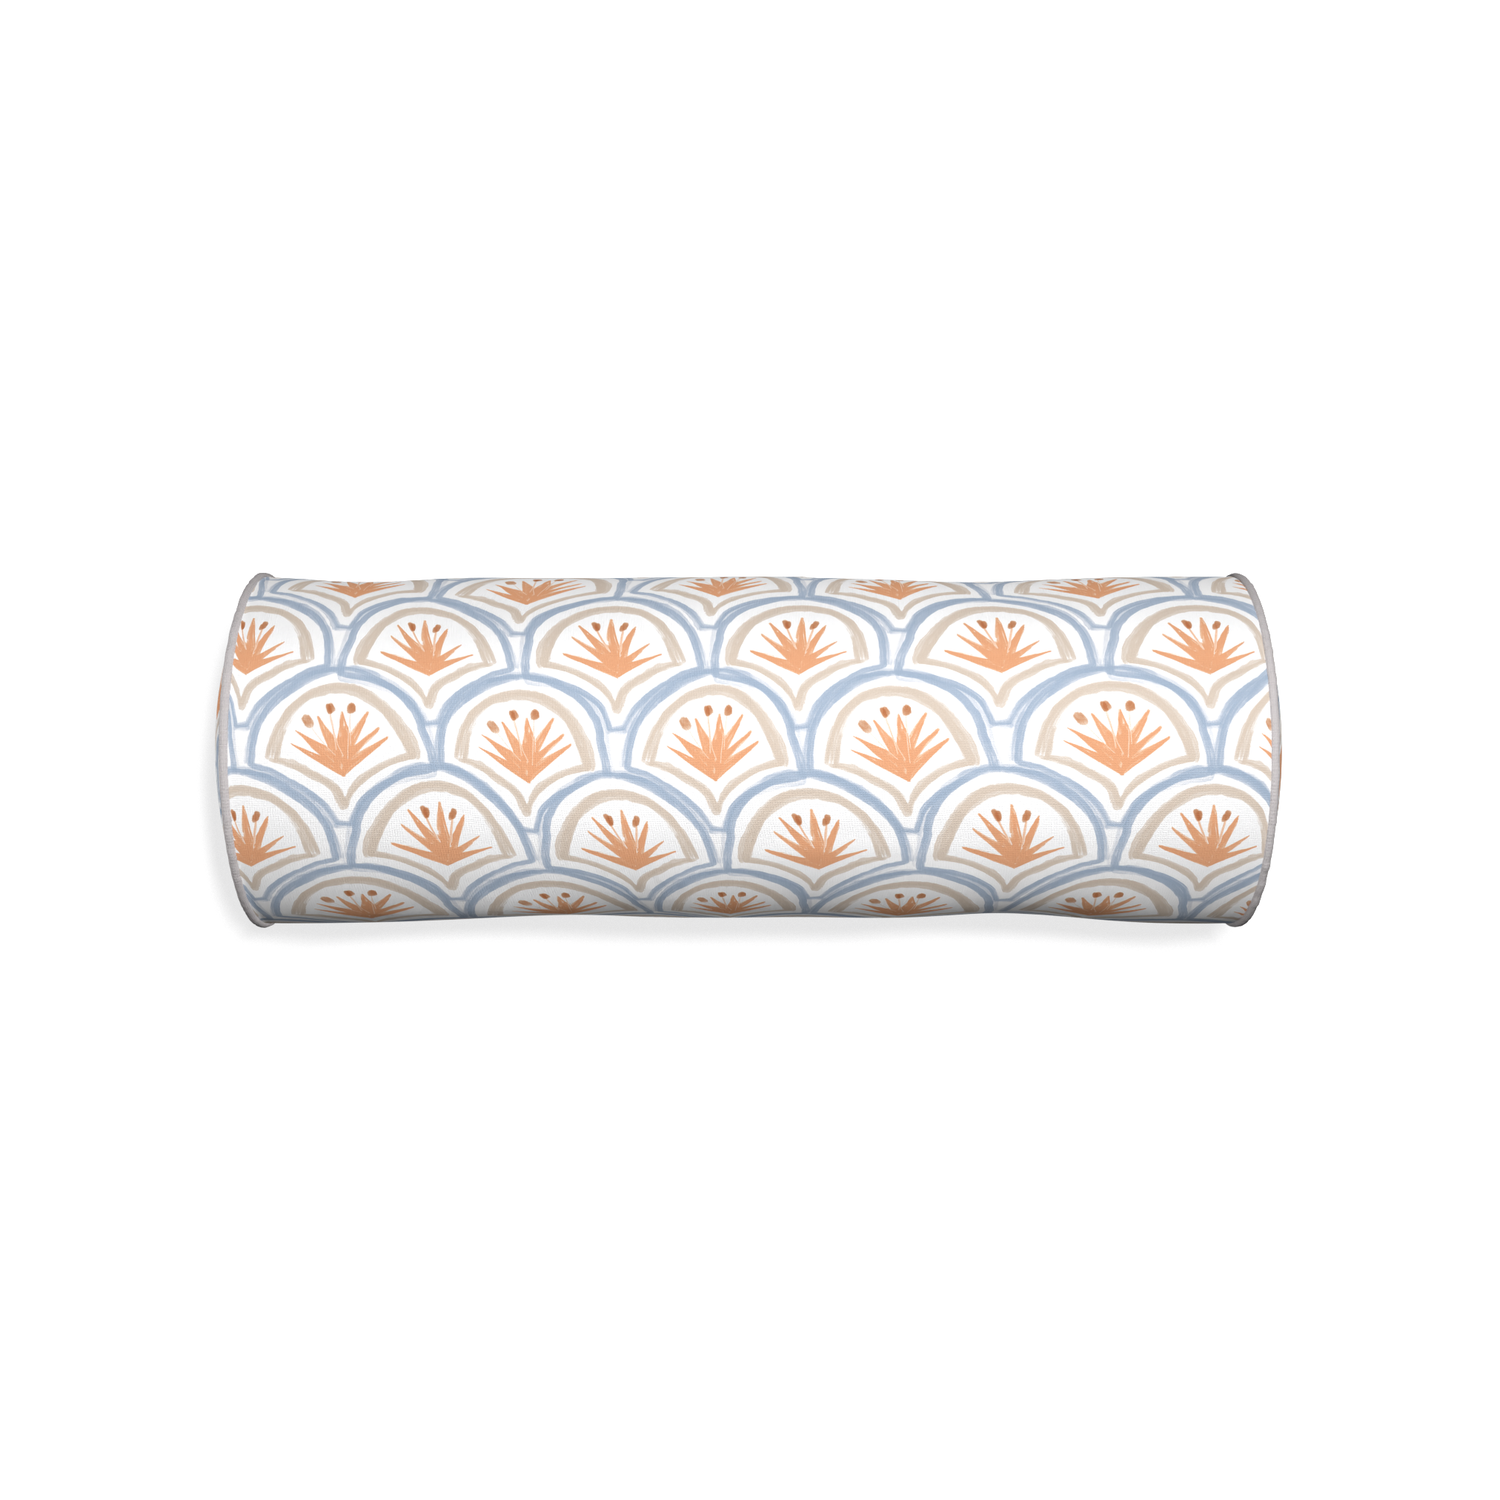 Bolster thatcher apricot custom art deco palm patternpillow with pebble piping on white background